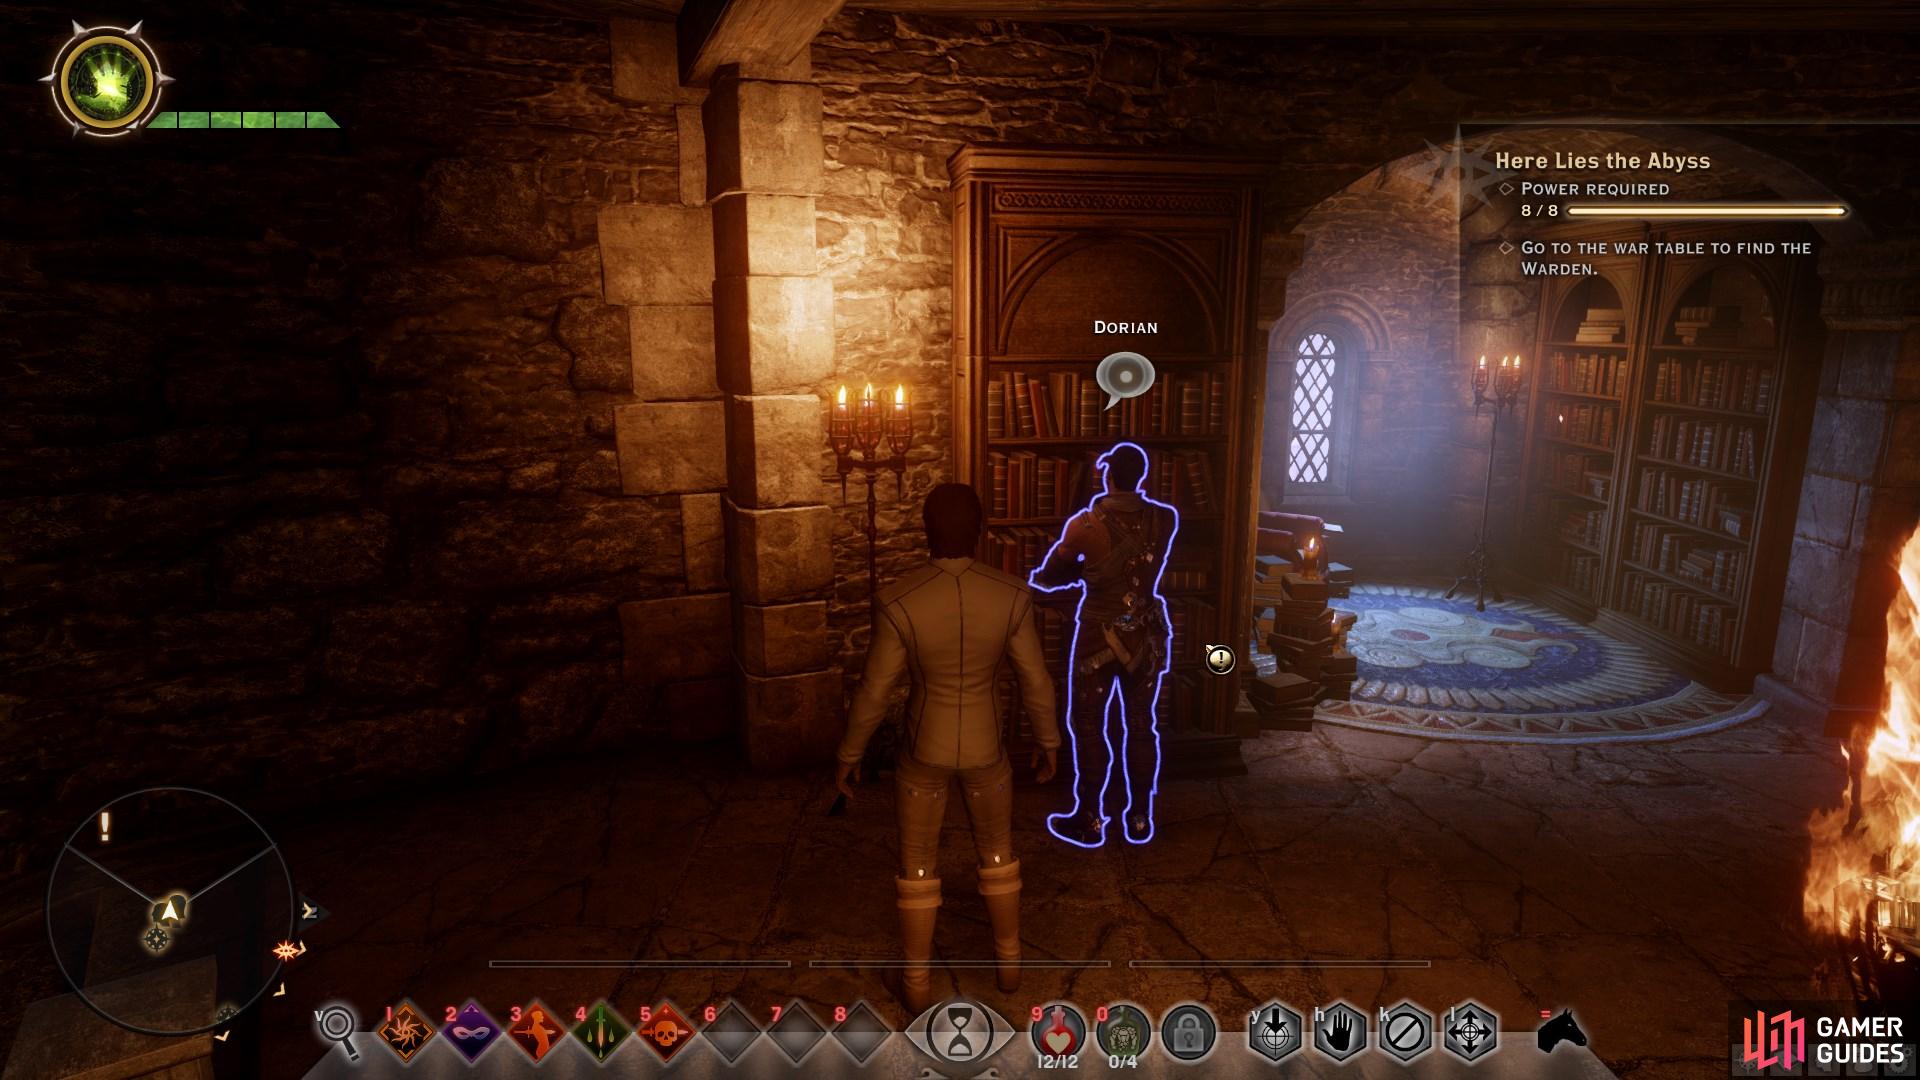 Dorian can be found at the highest point of the library within the main keep.